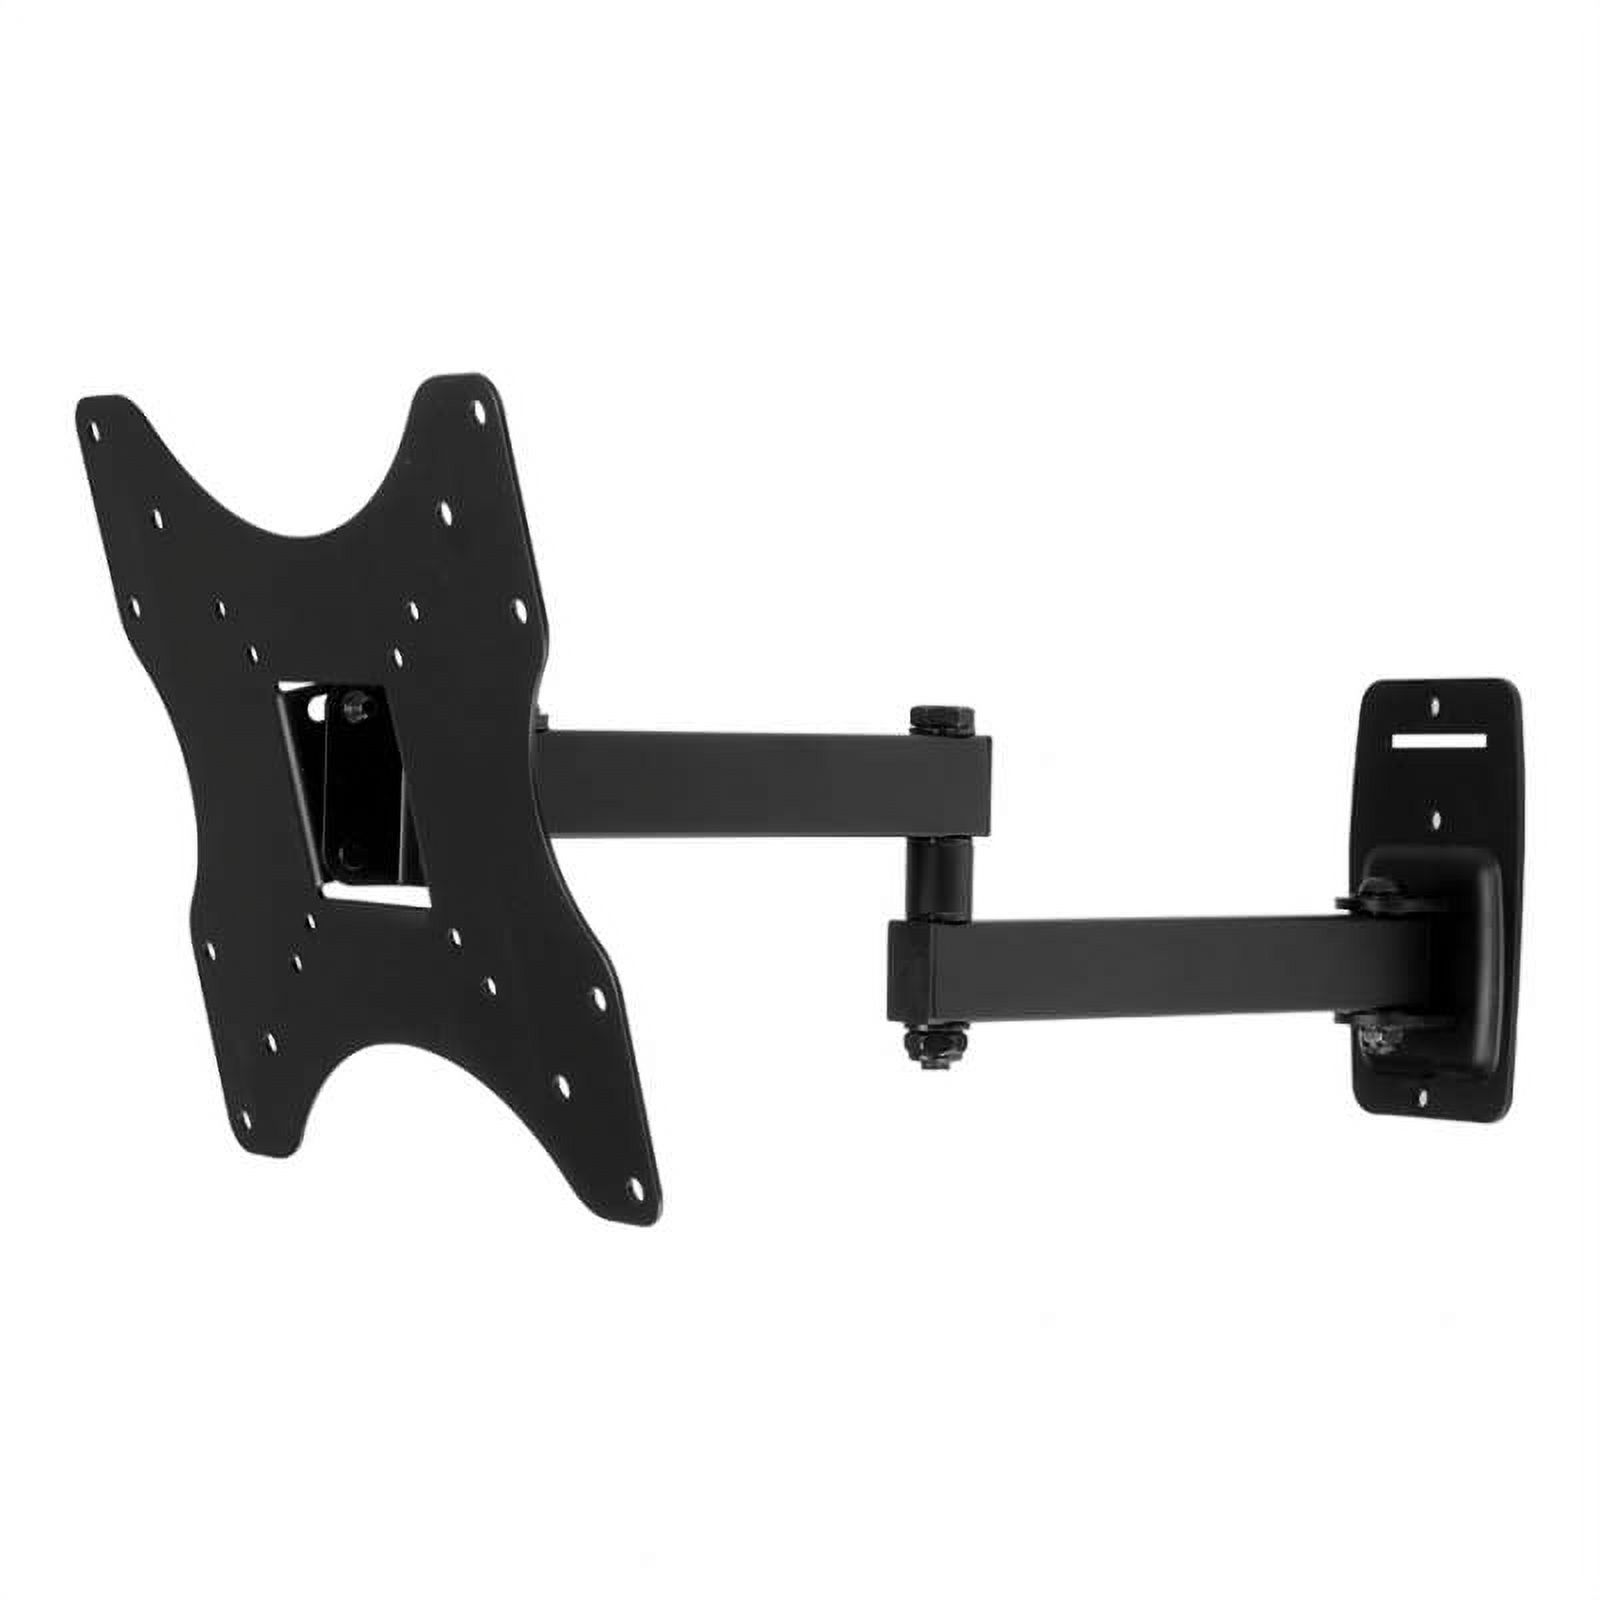 SWIFT240-AP Multi-Position TV Wall Mount for TVs up to 39-inch - image 1 of 3